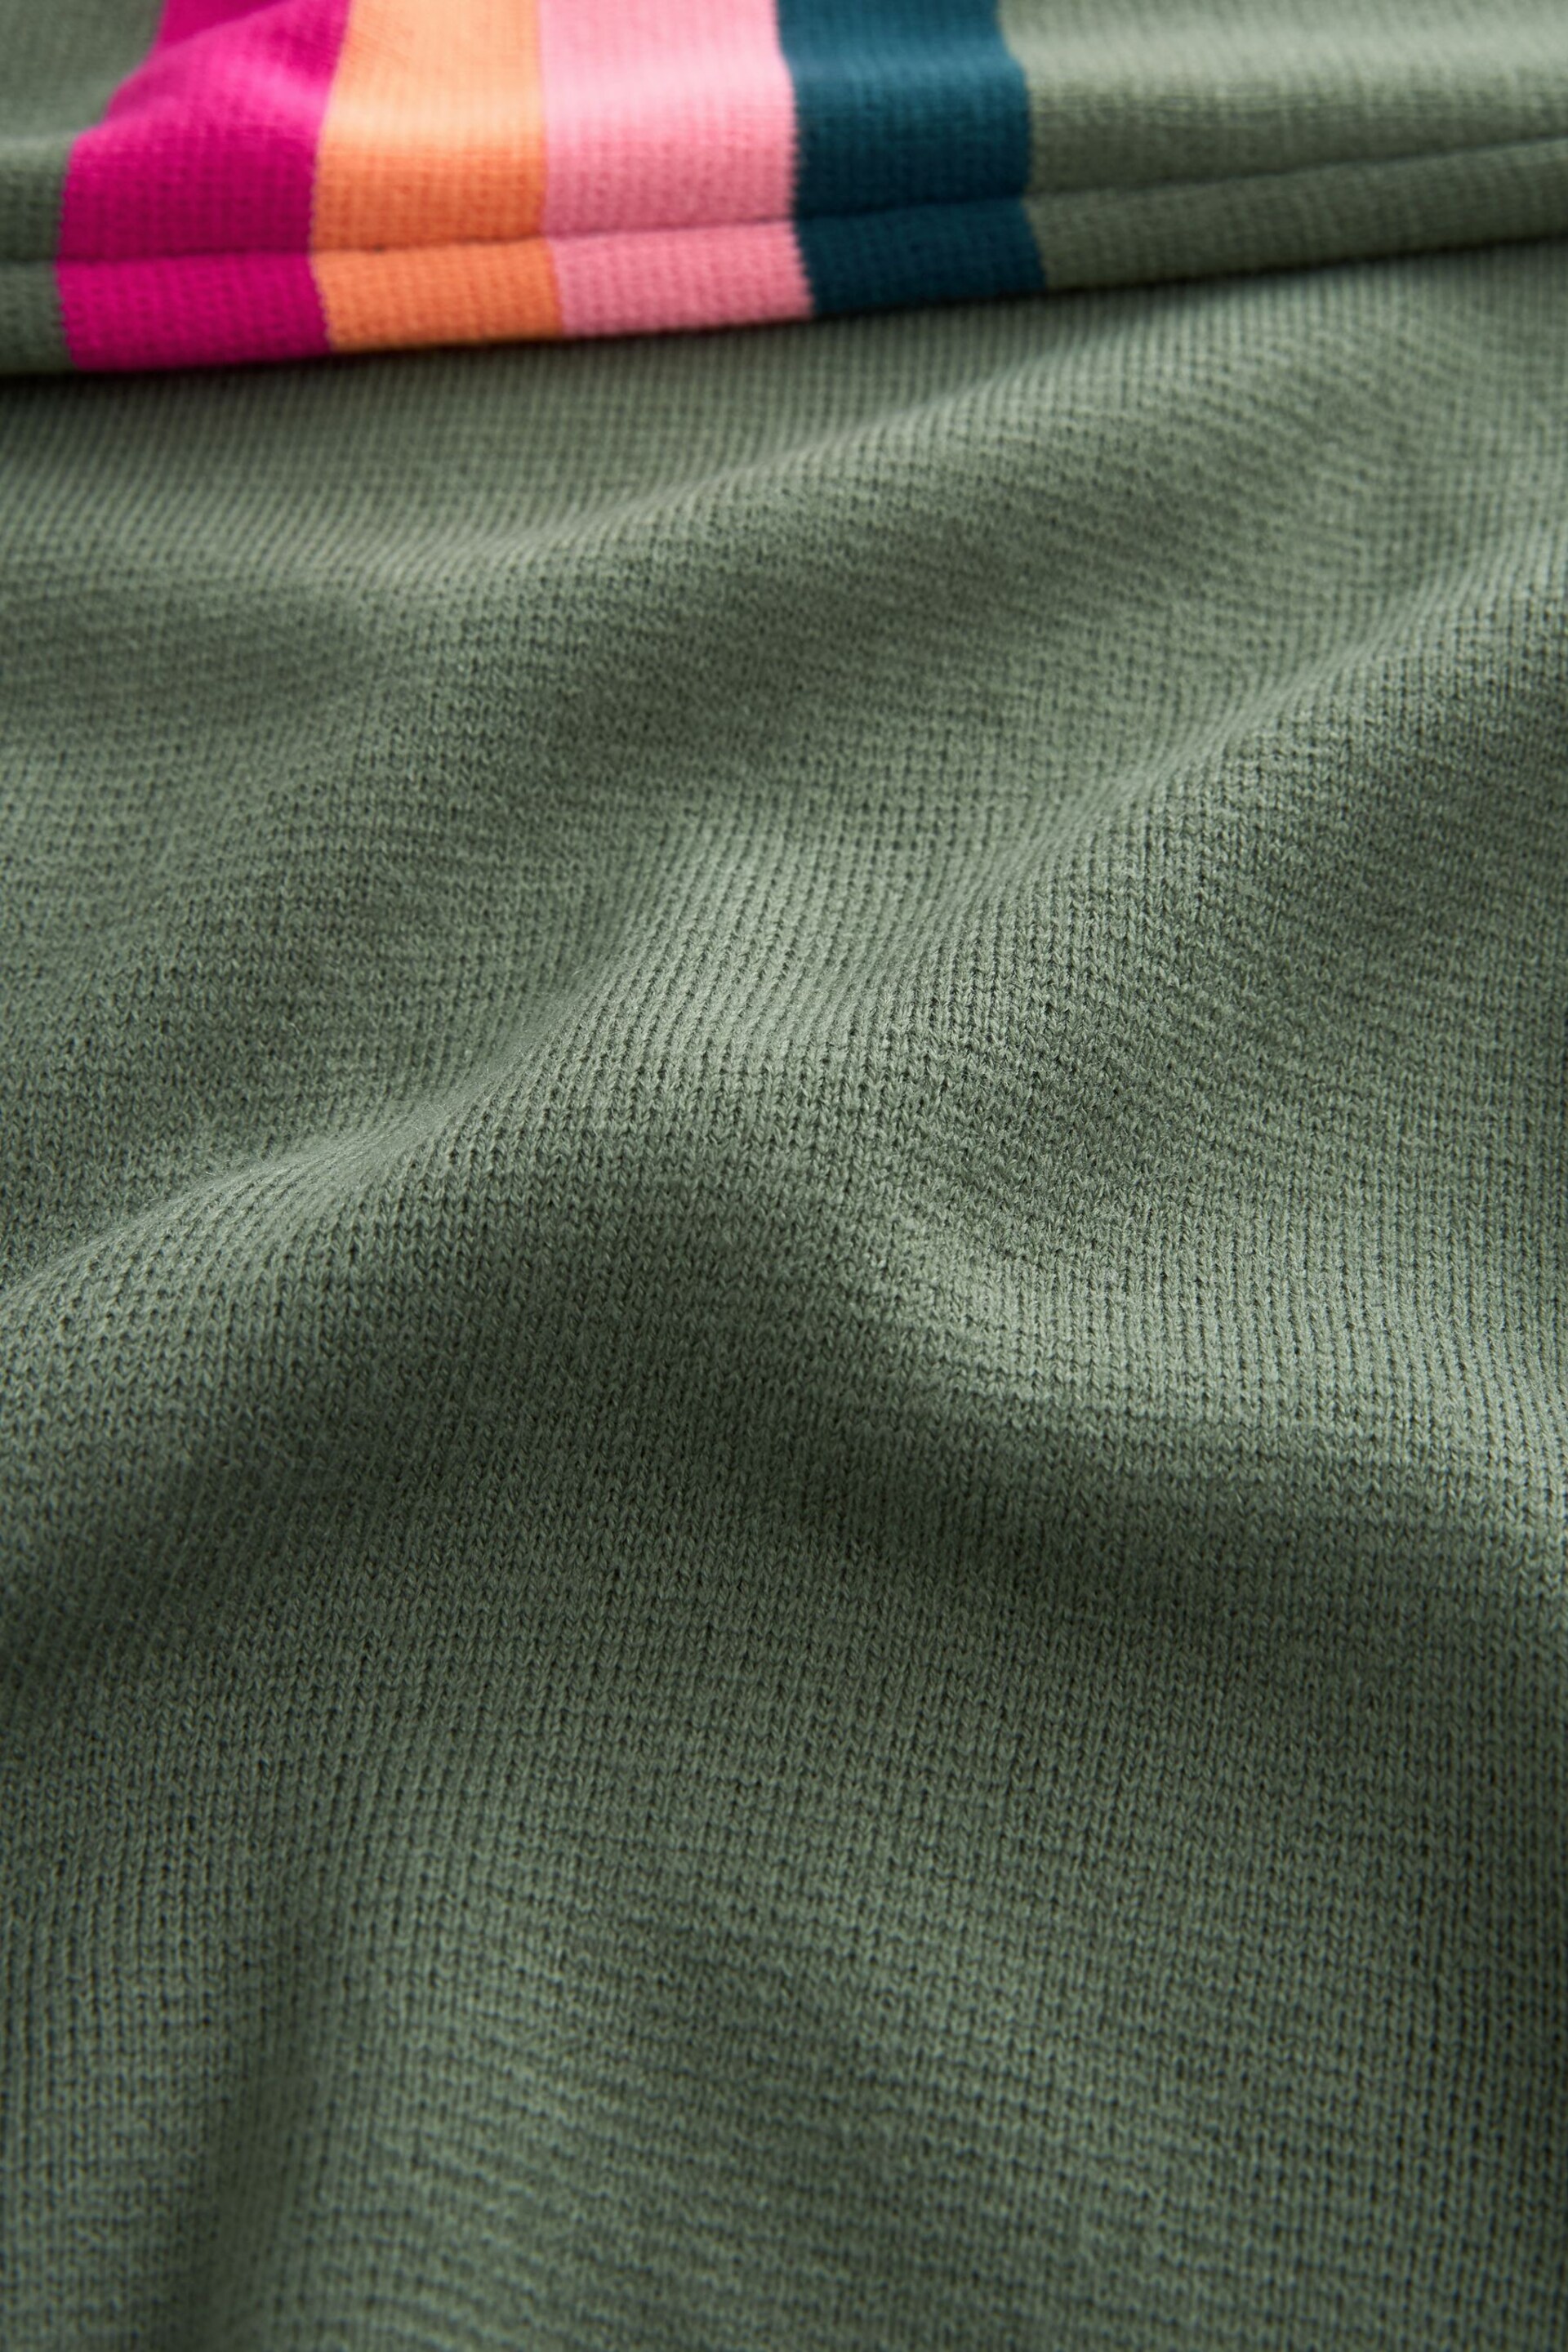 Khaki Green Hooded Cosy Jumper - Image 6 of 6